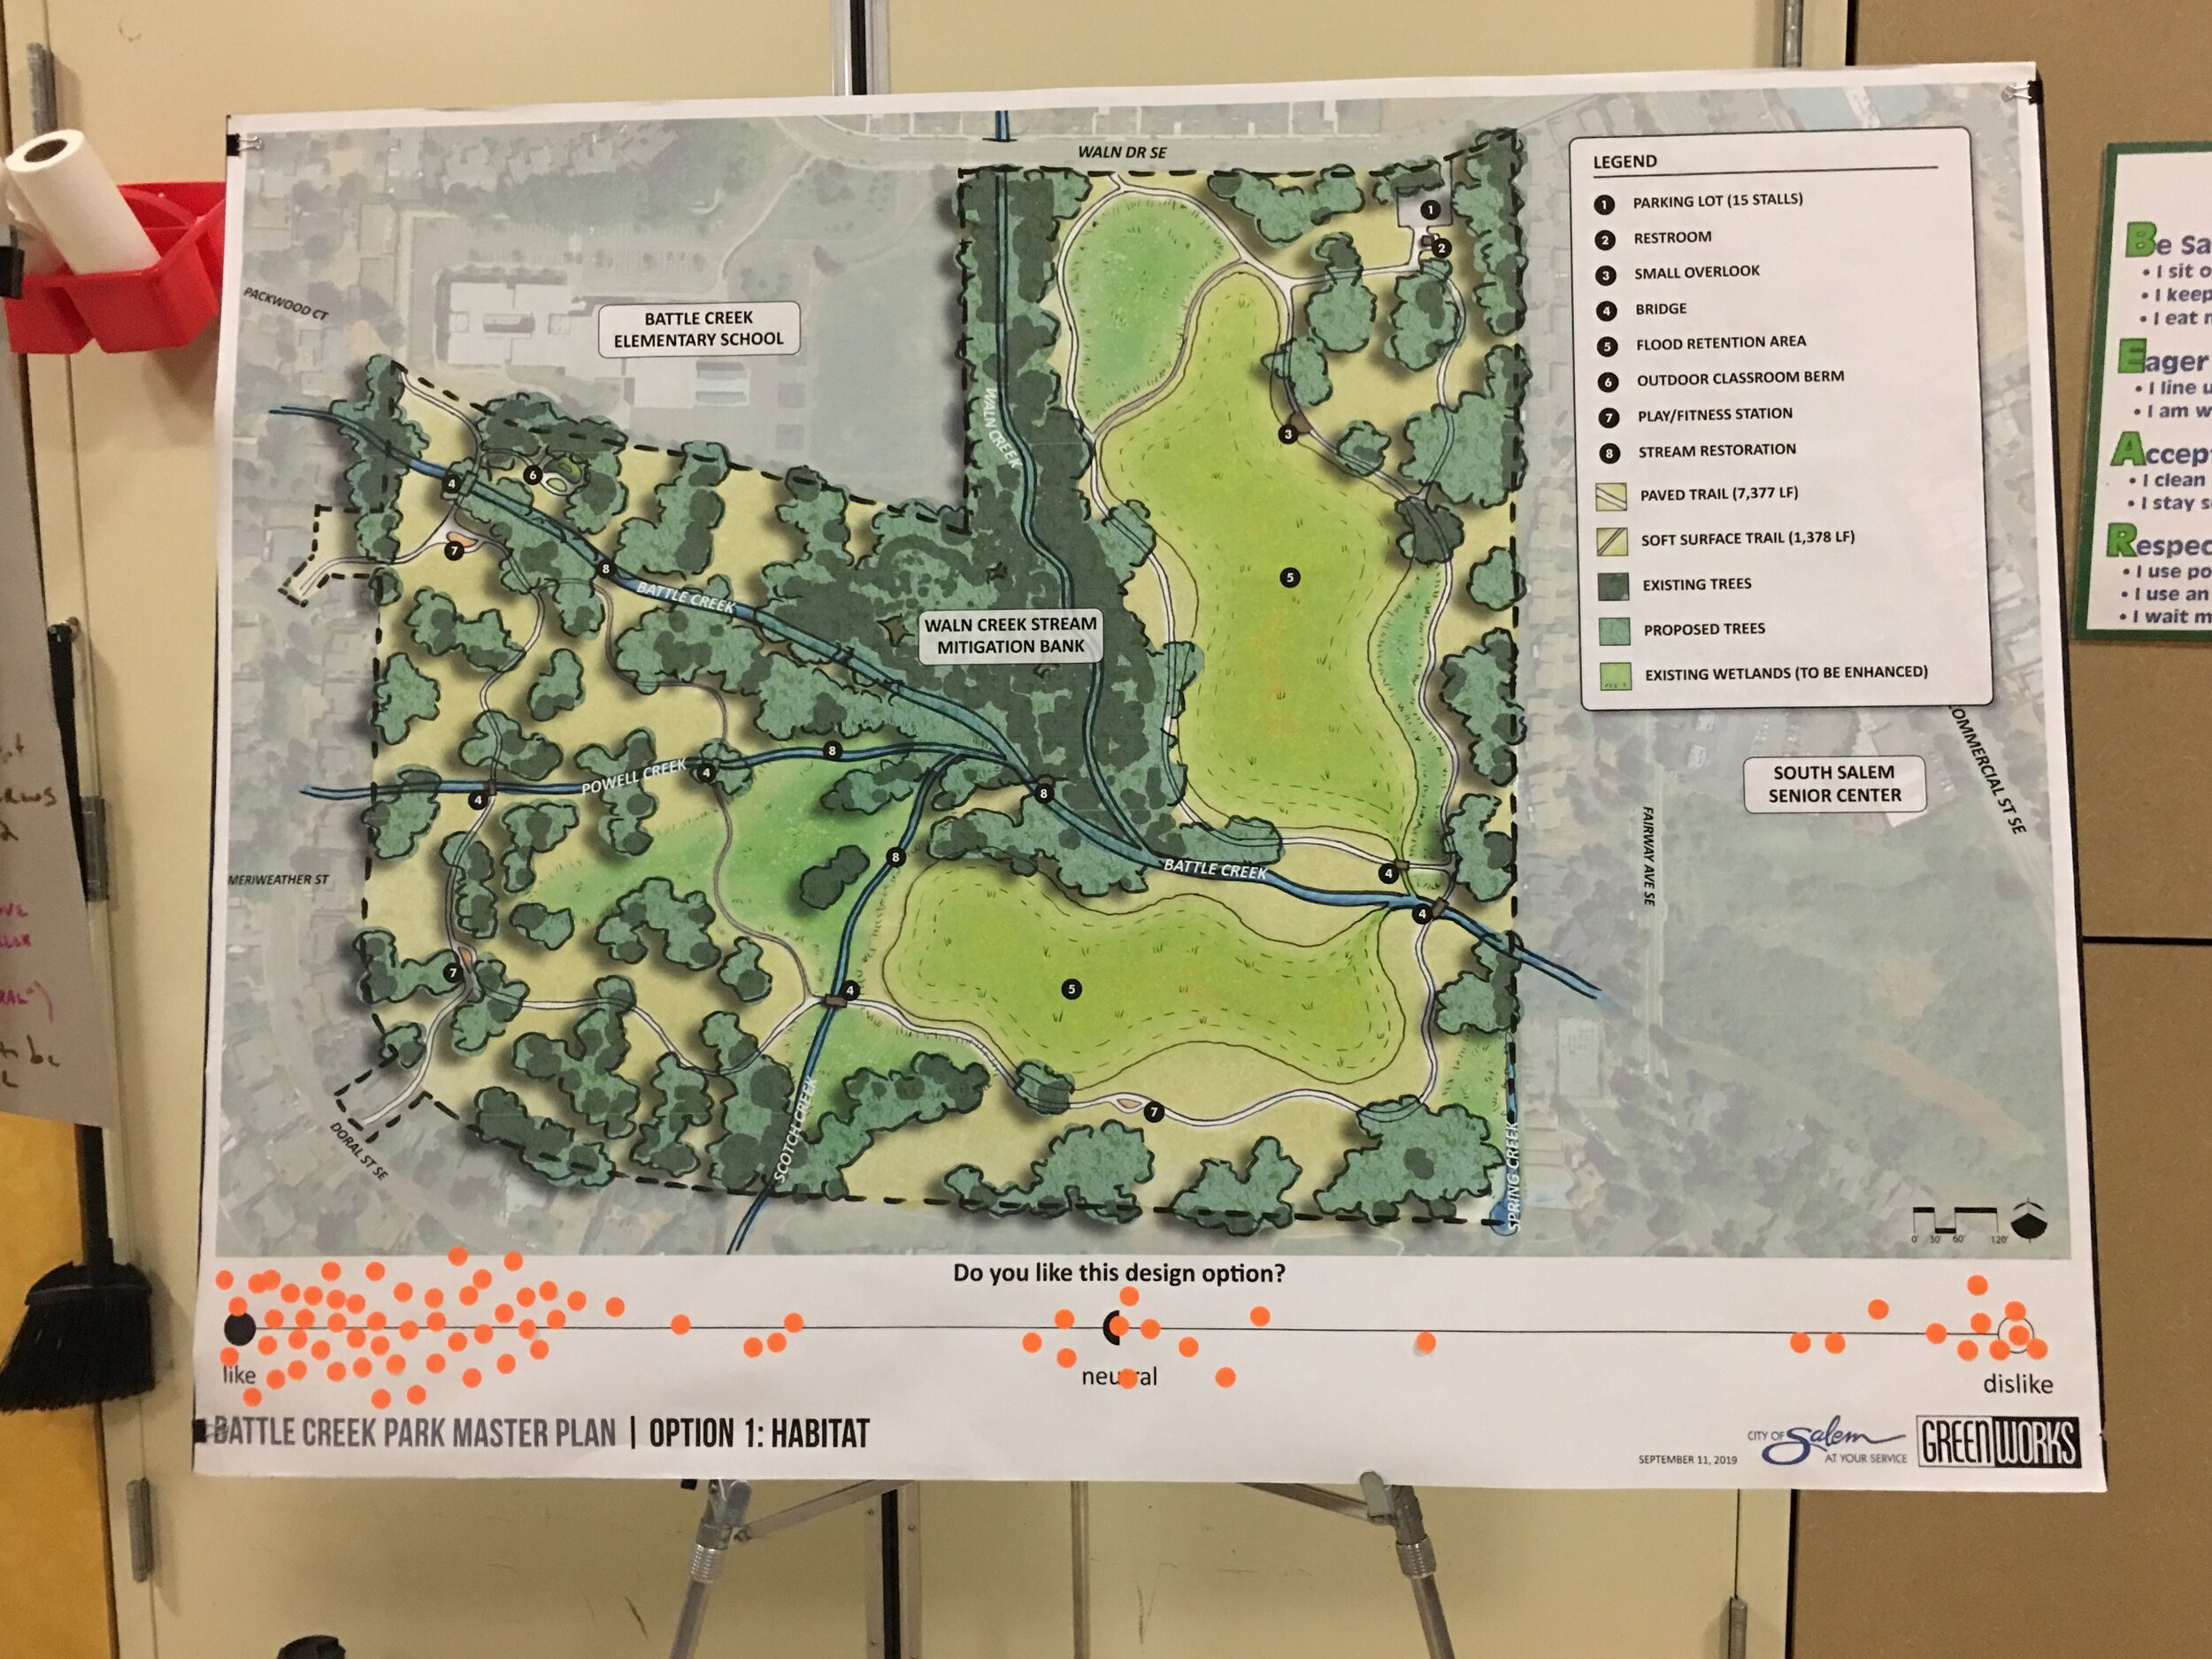 display board showing options for development at battle creek park